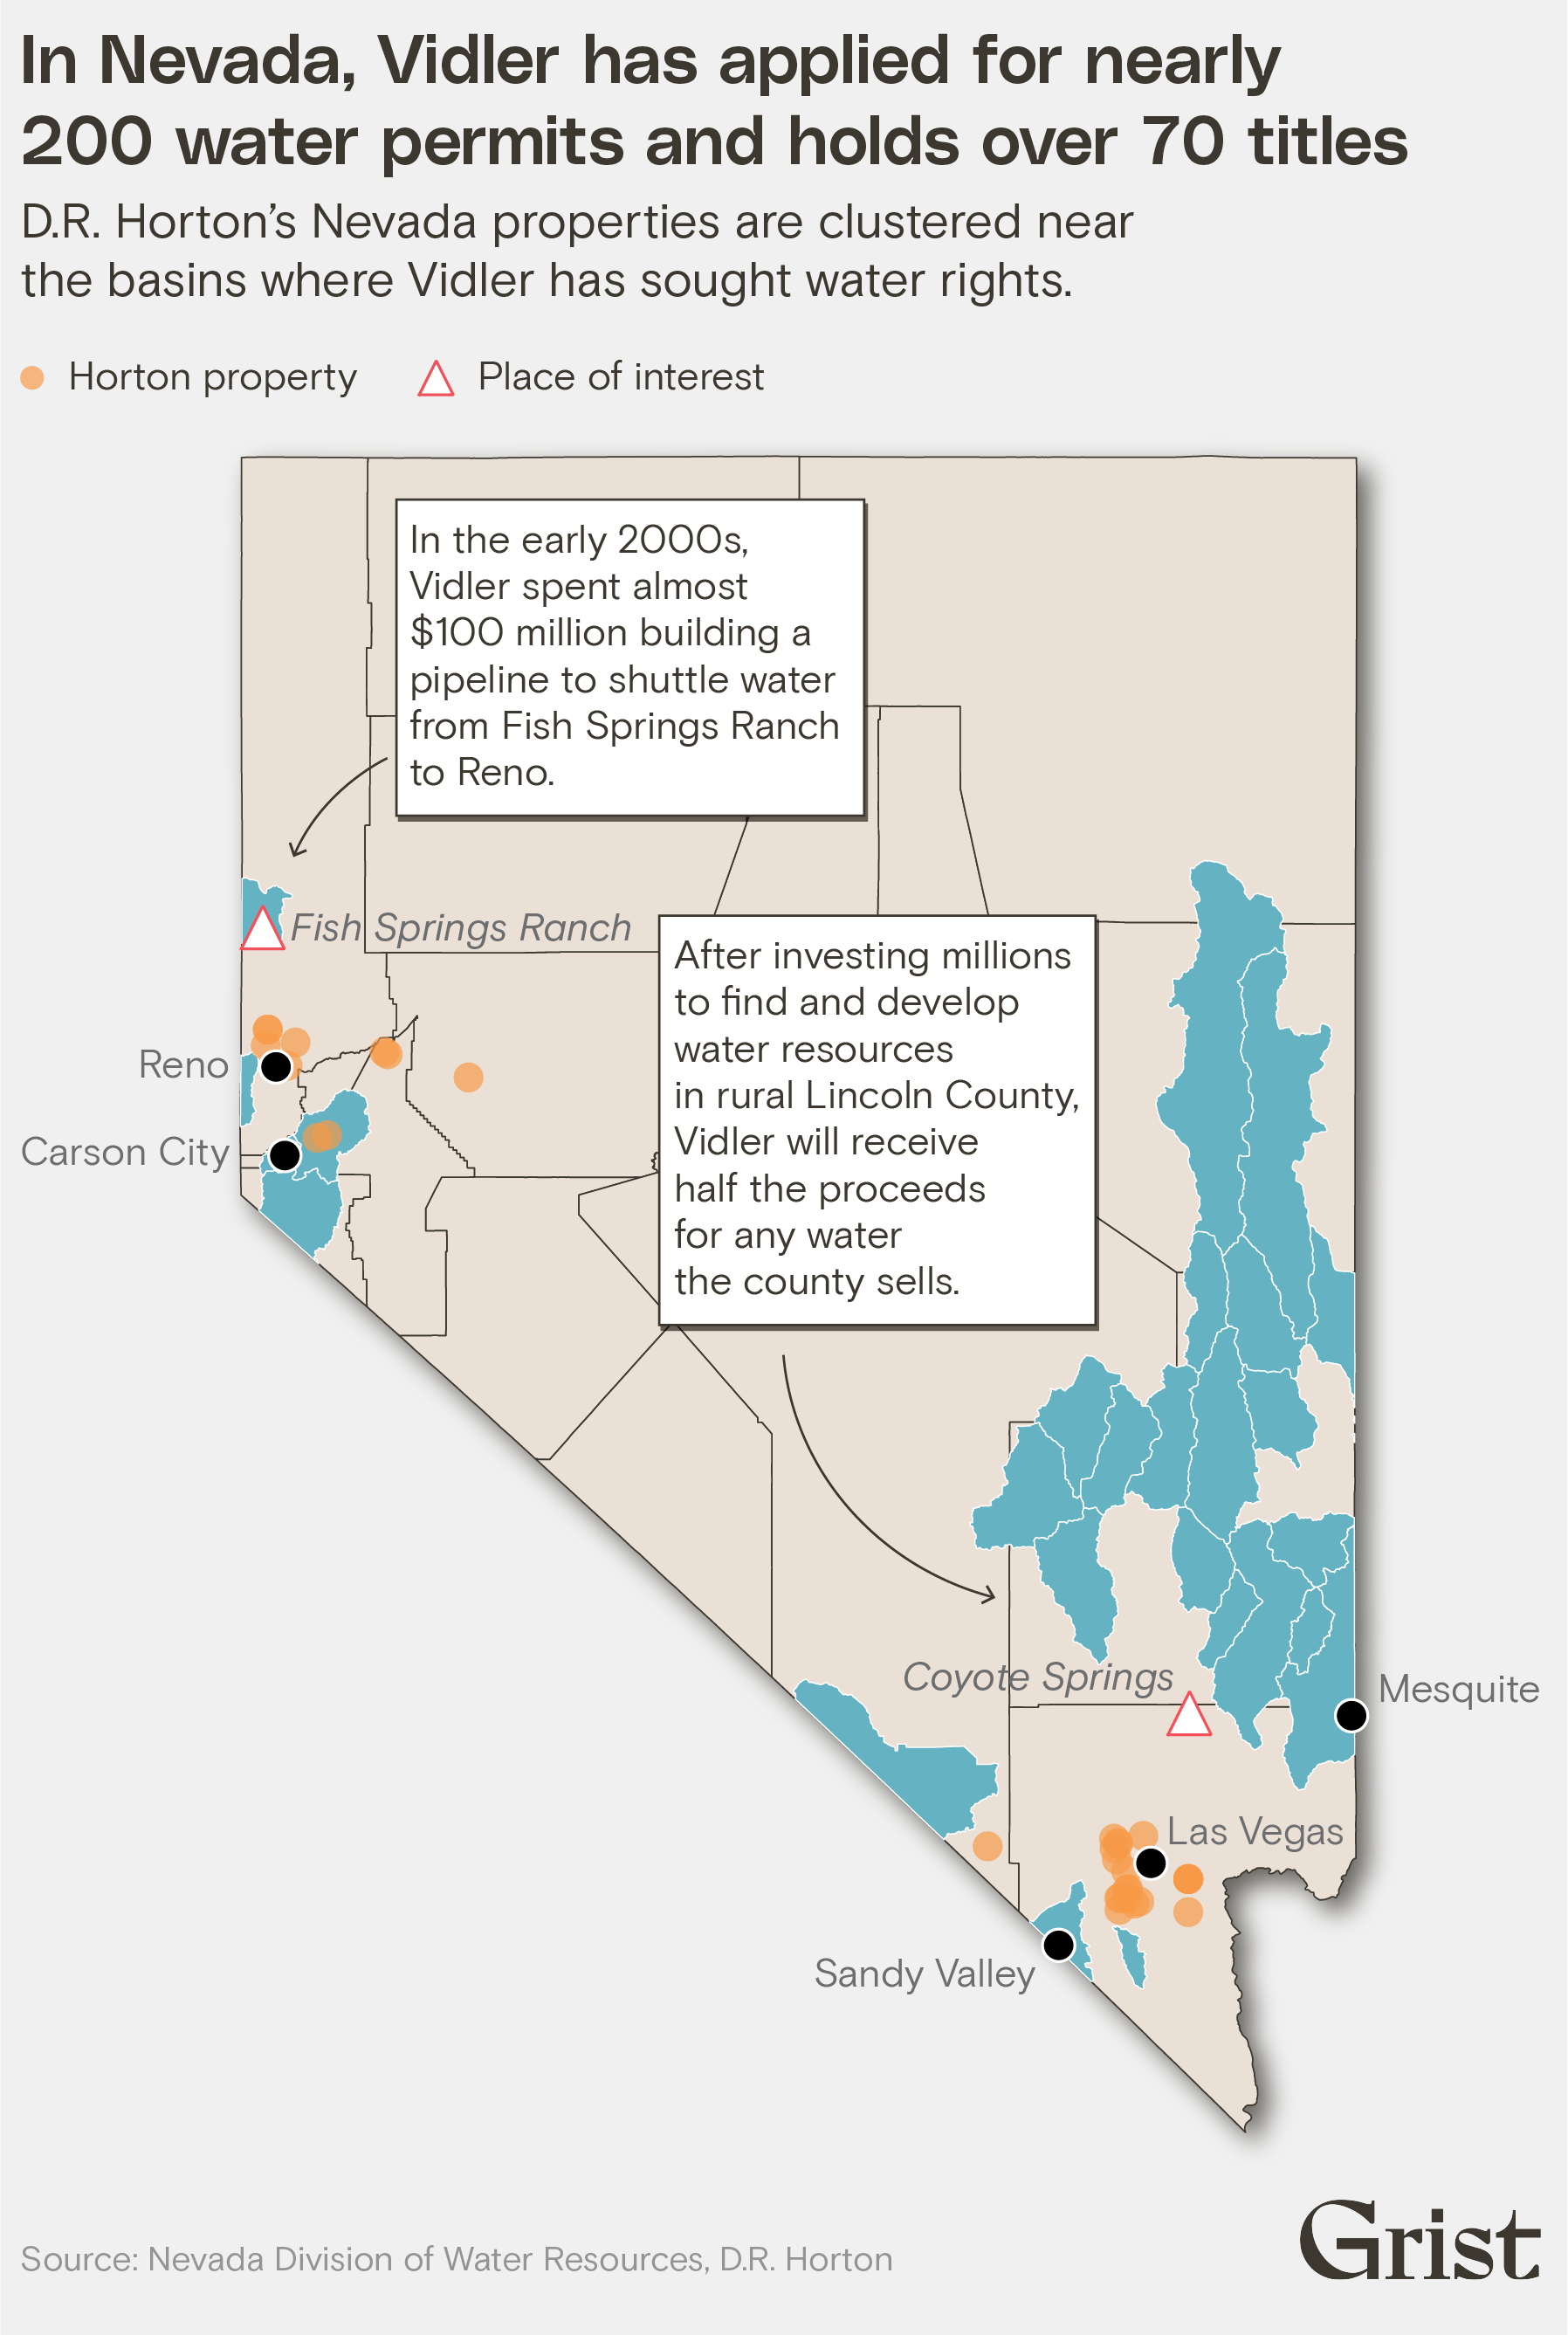 A map showing D.R. Horton's Nevada properties. They are clustered where Vidler has sought water rights. The title reads: "In Nevada, Vidler has applied for nearly 200 water permits and holds over 70 titles."